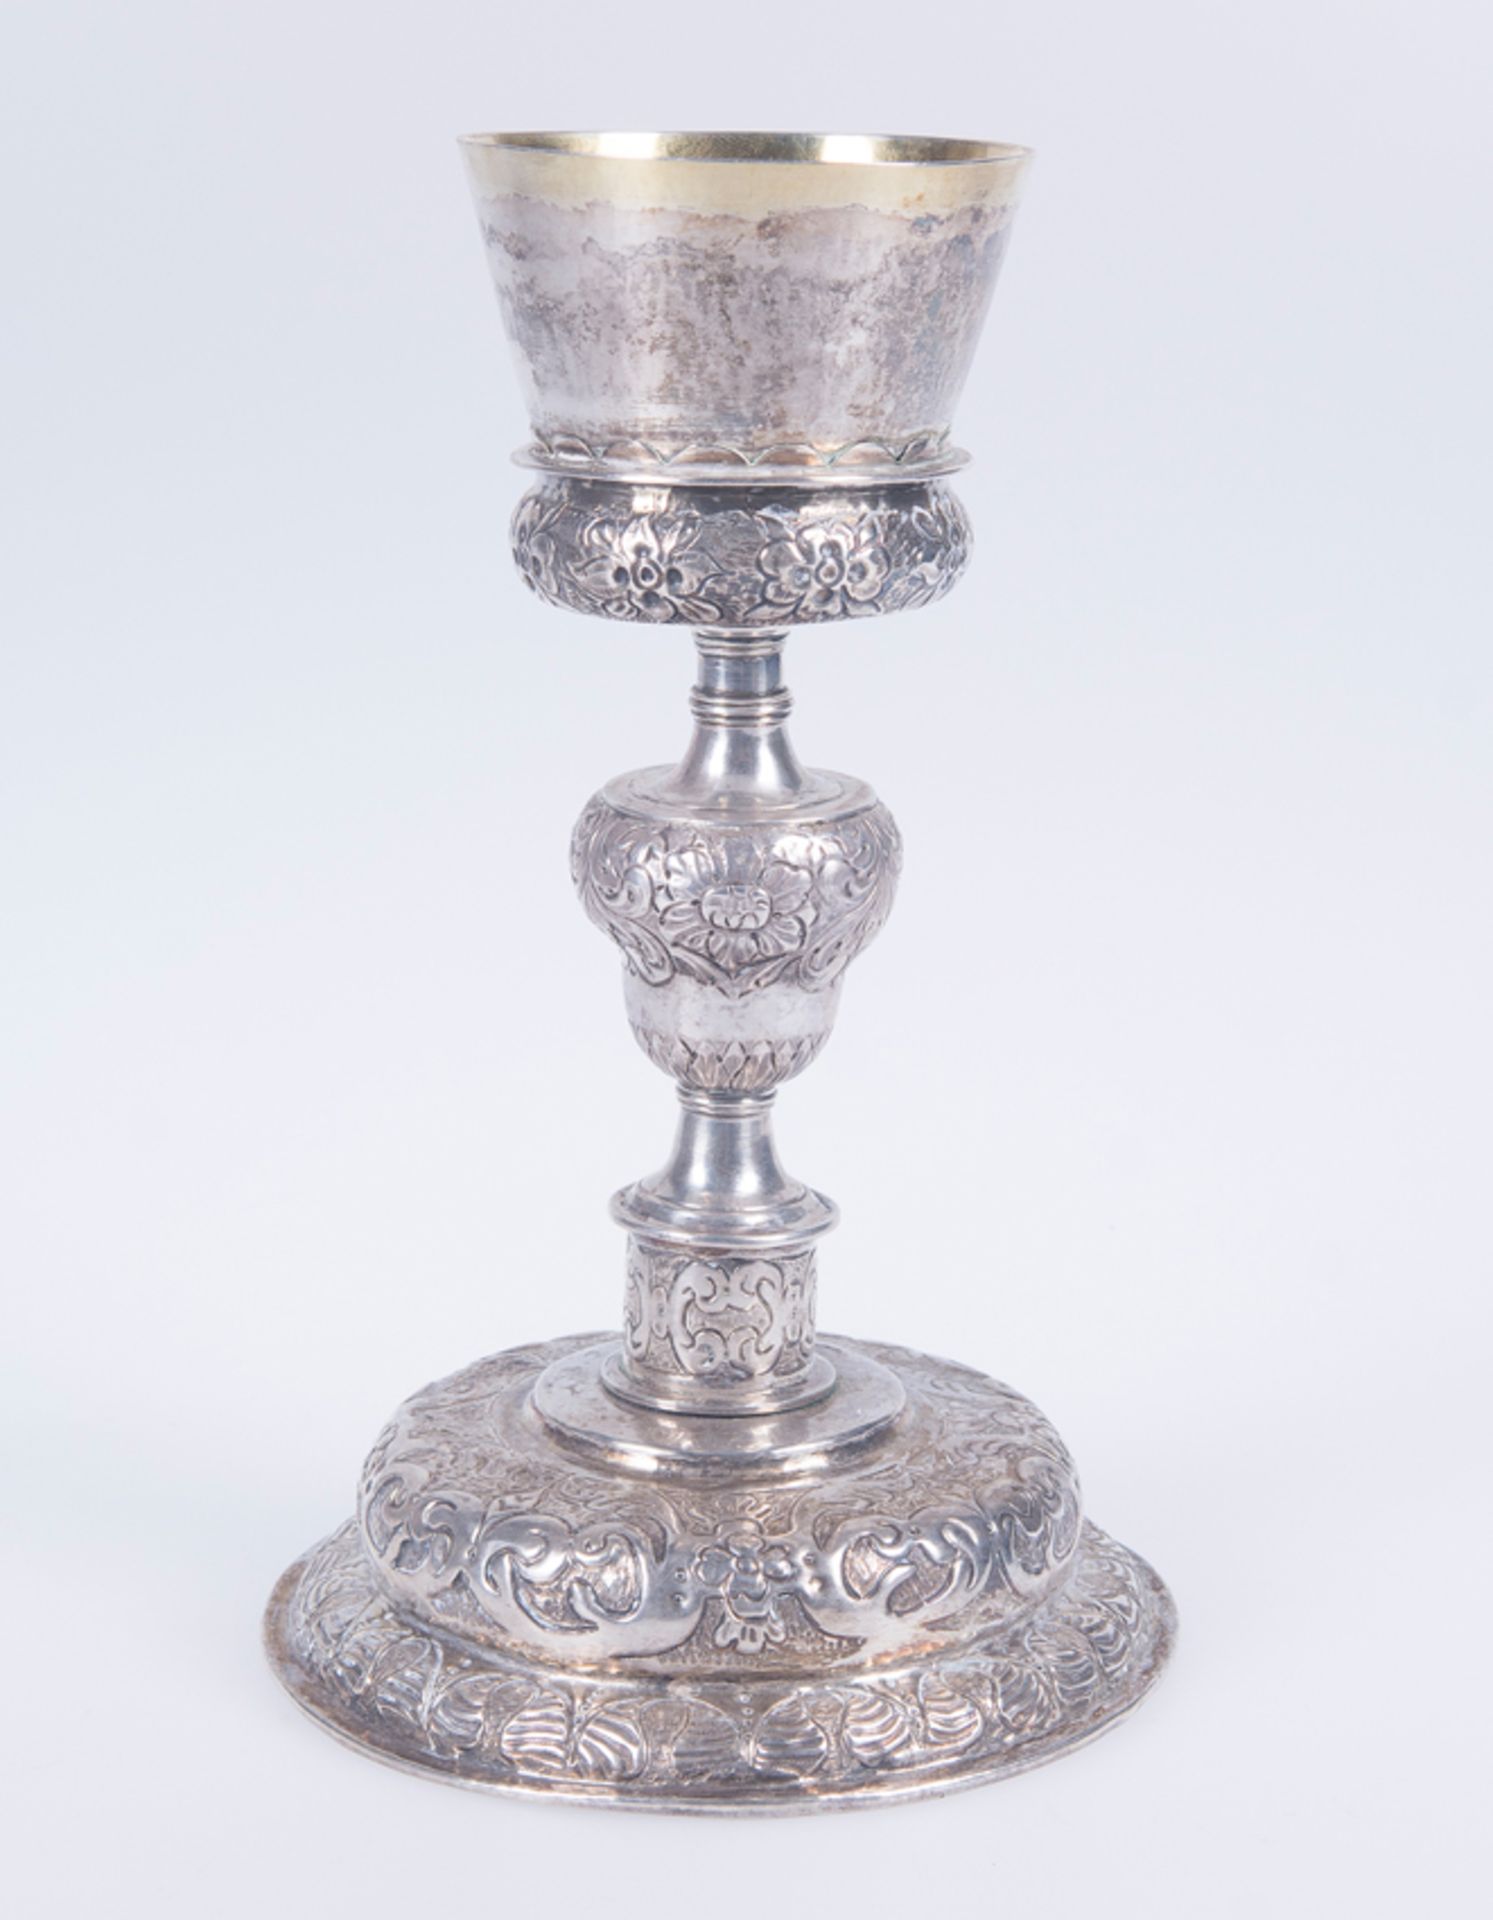 Embossed and chased silver chalice with a silver vermeil interior. Possibly Mexican. Late 16th cent